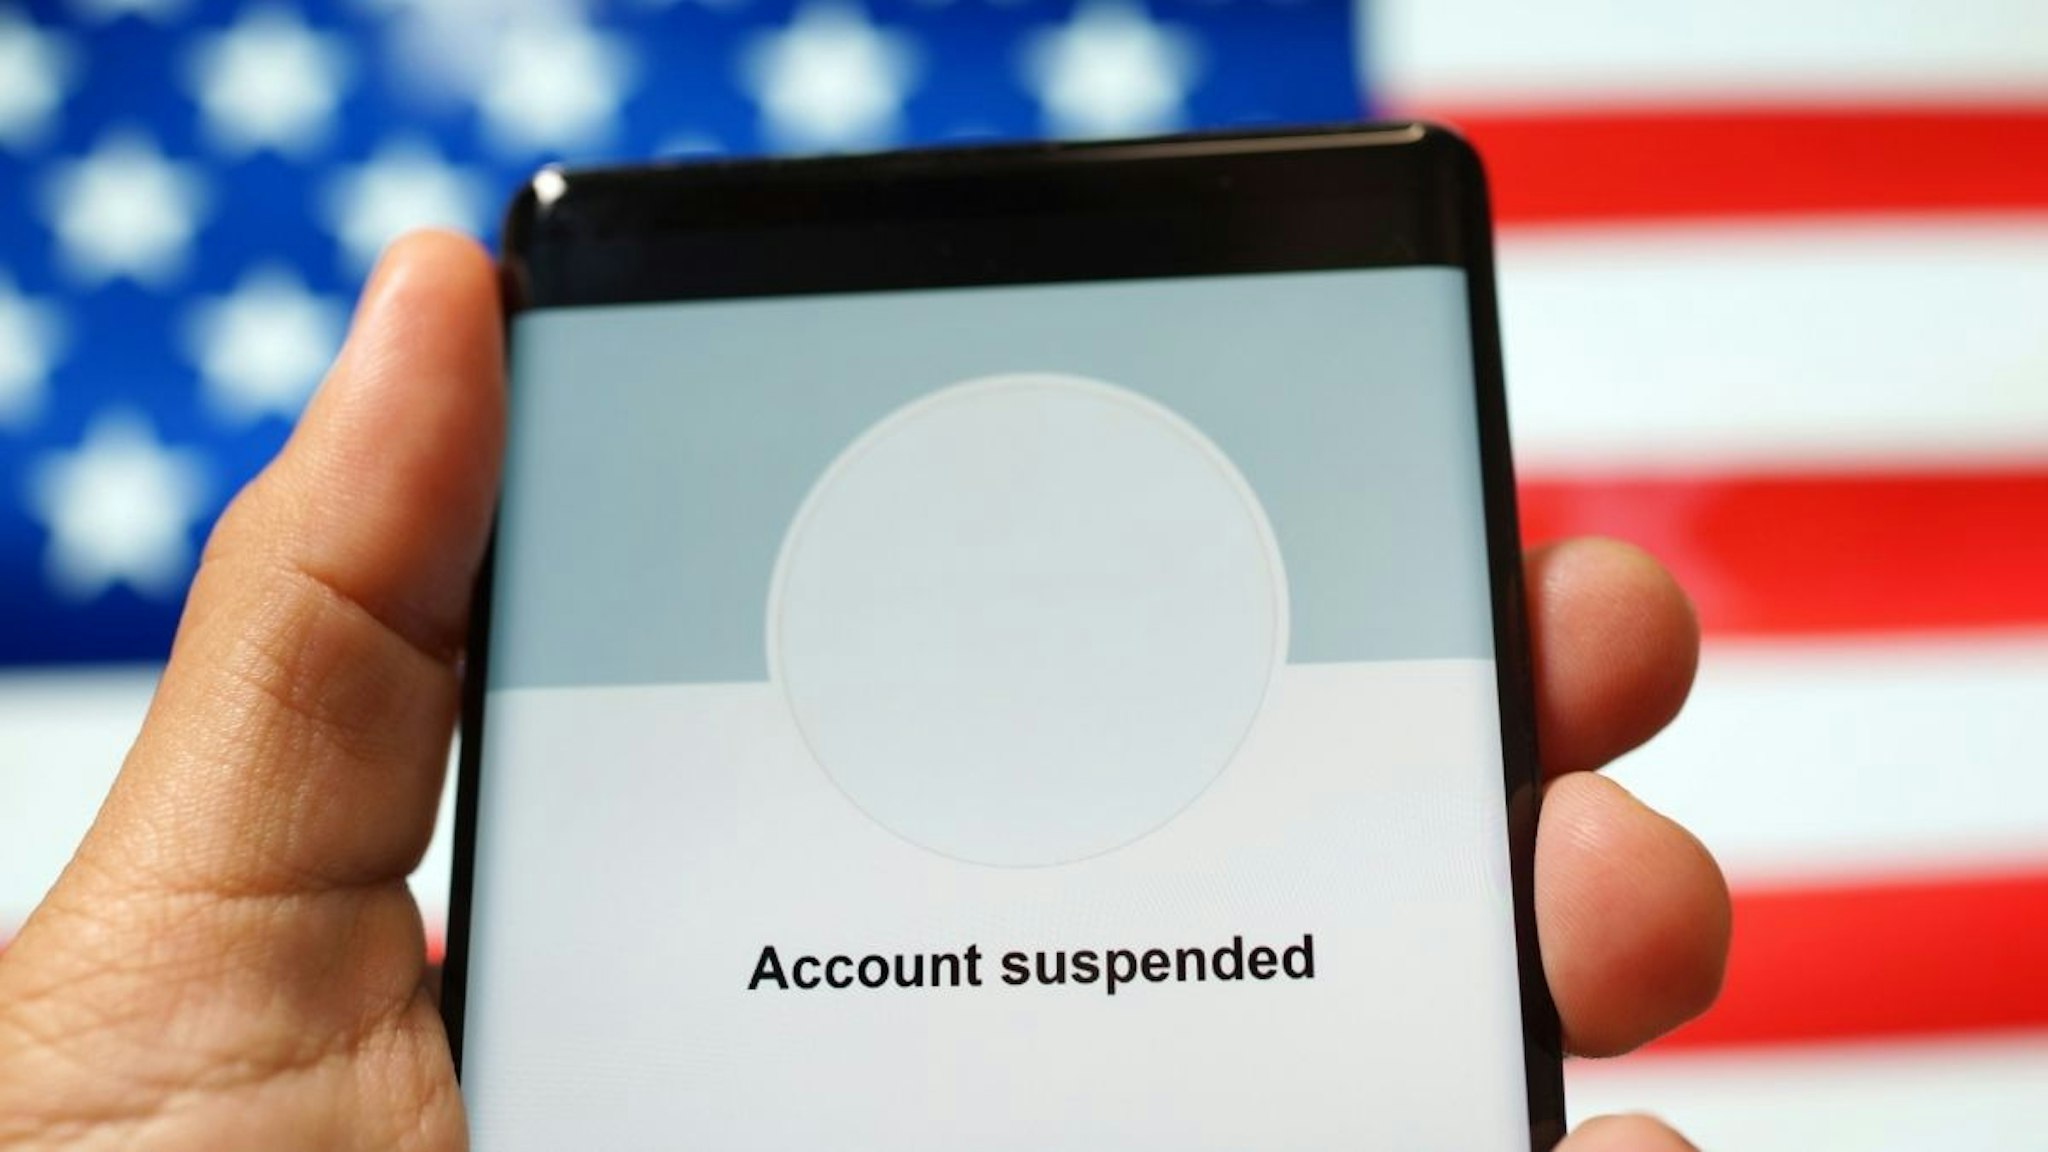 Close up an adult hand holding a smartphone showing "Account Suspended" from a social media application against the American flag background.